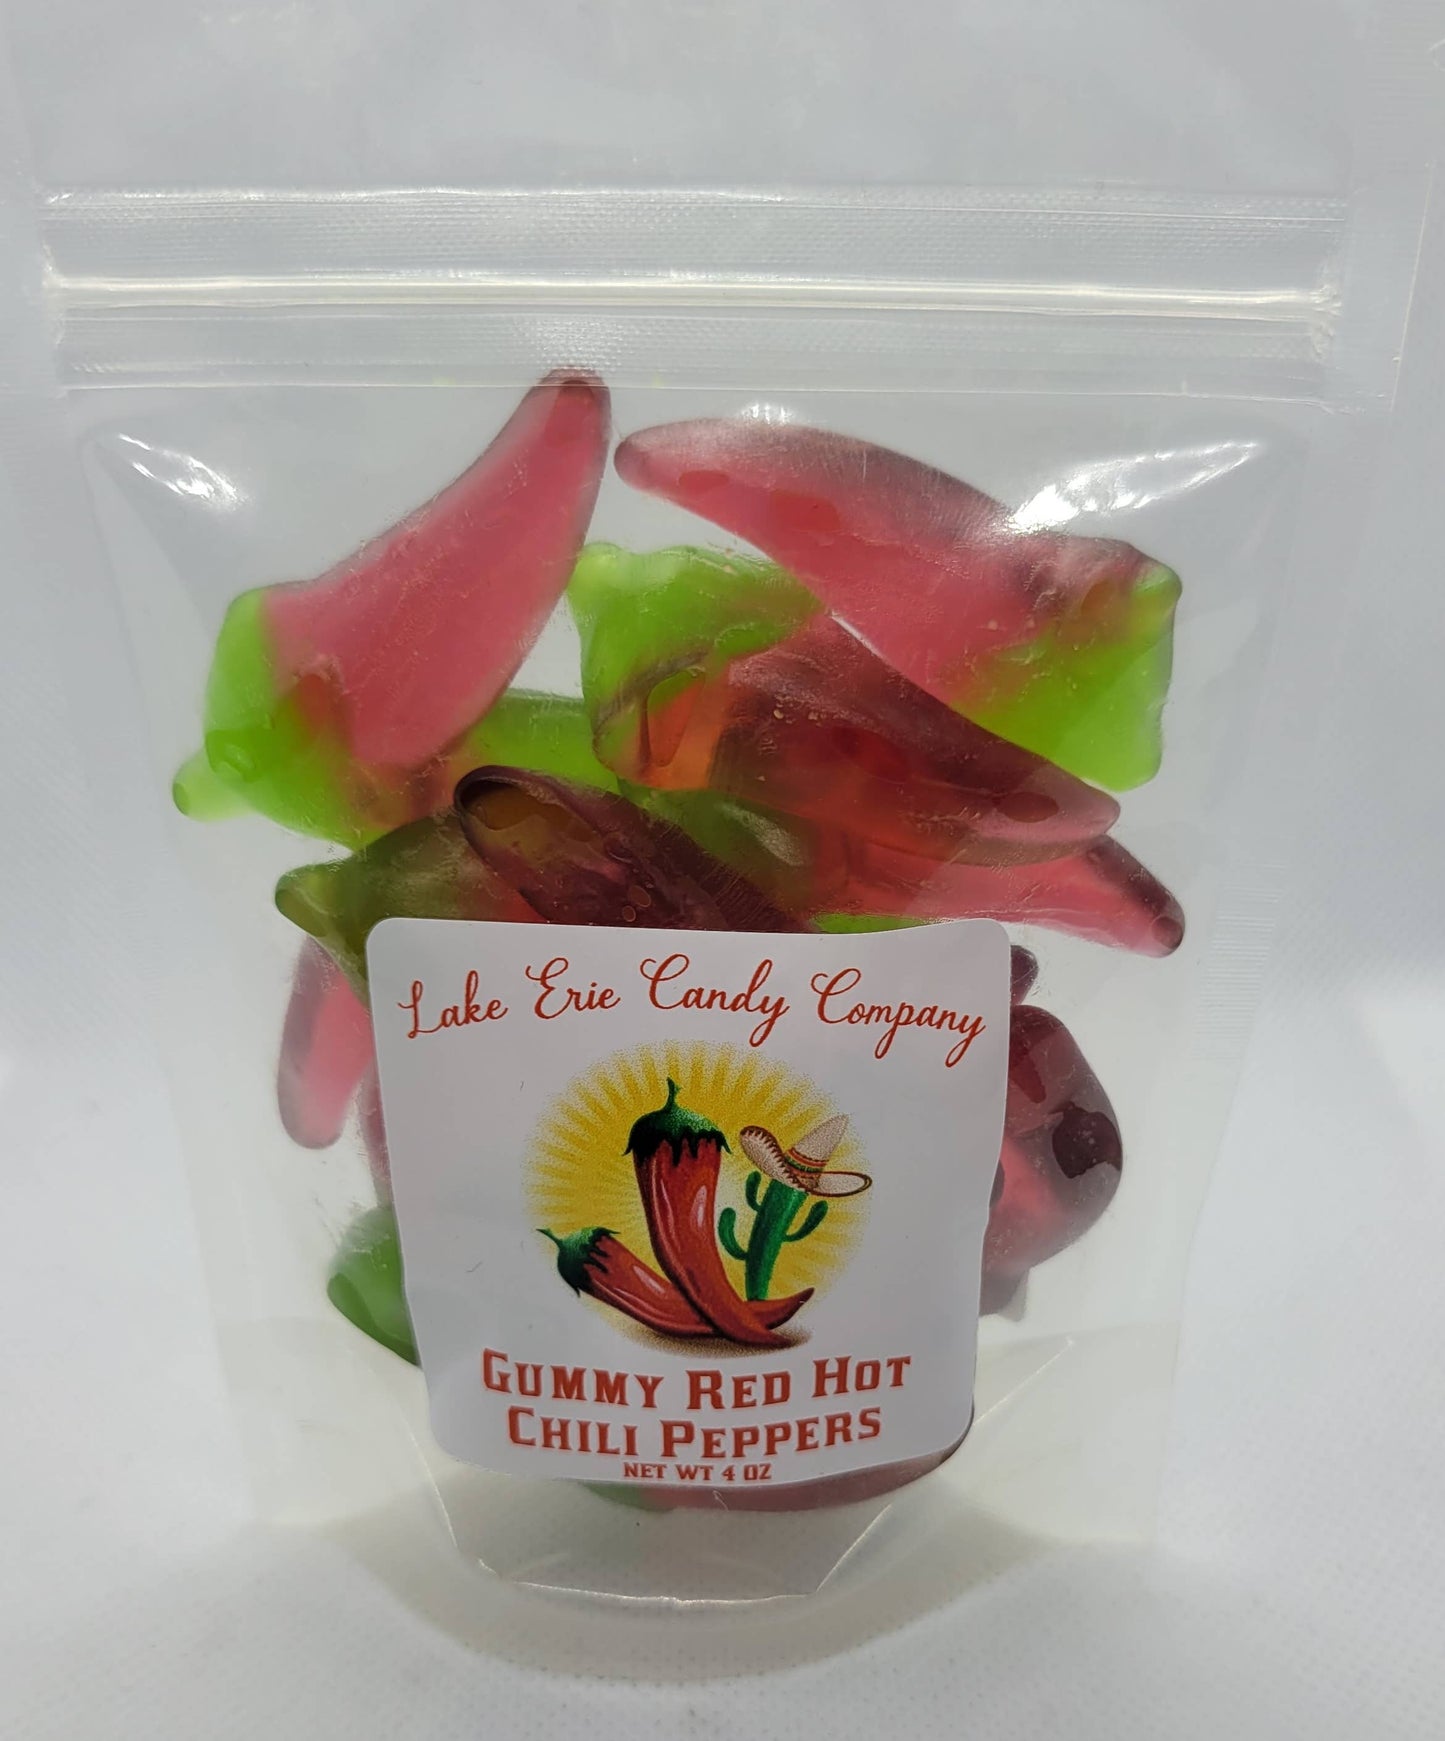 Gummy Red Hot Chili Peppers